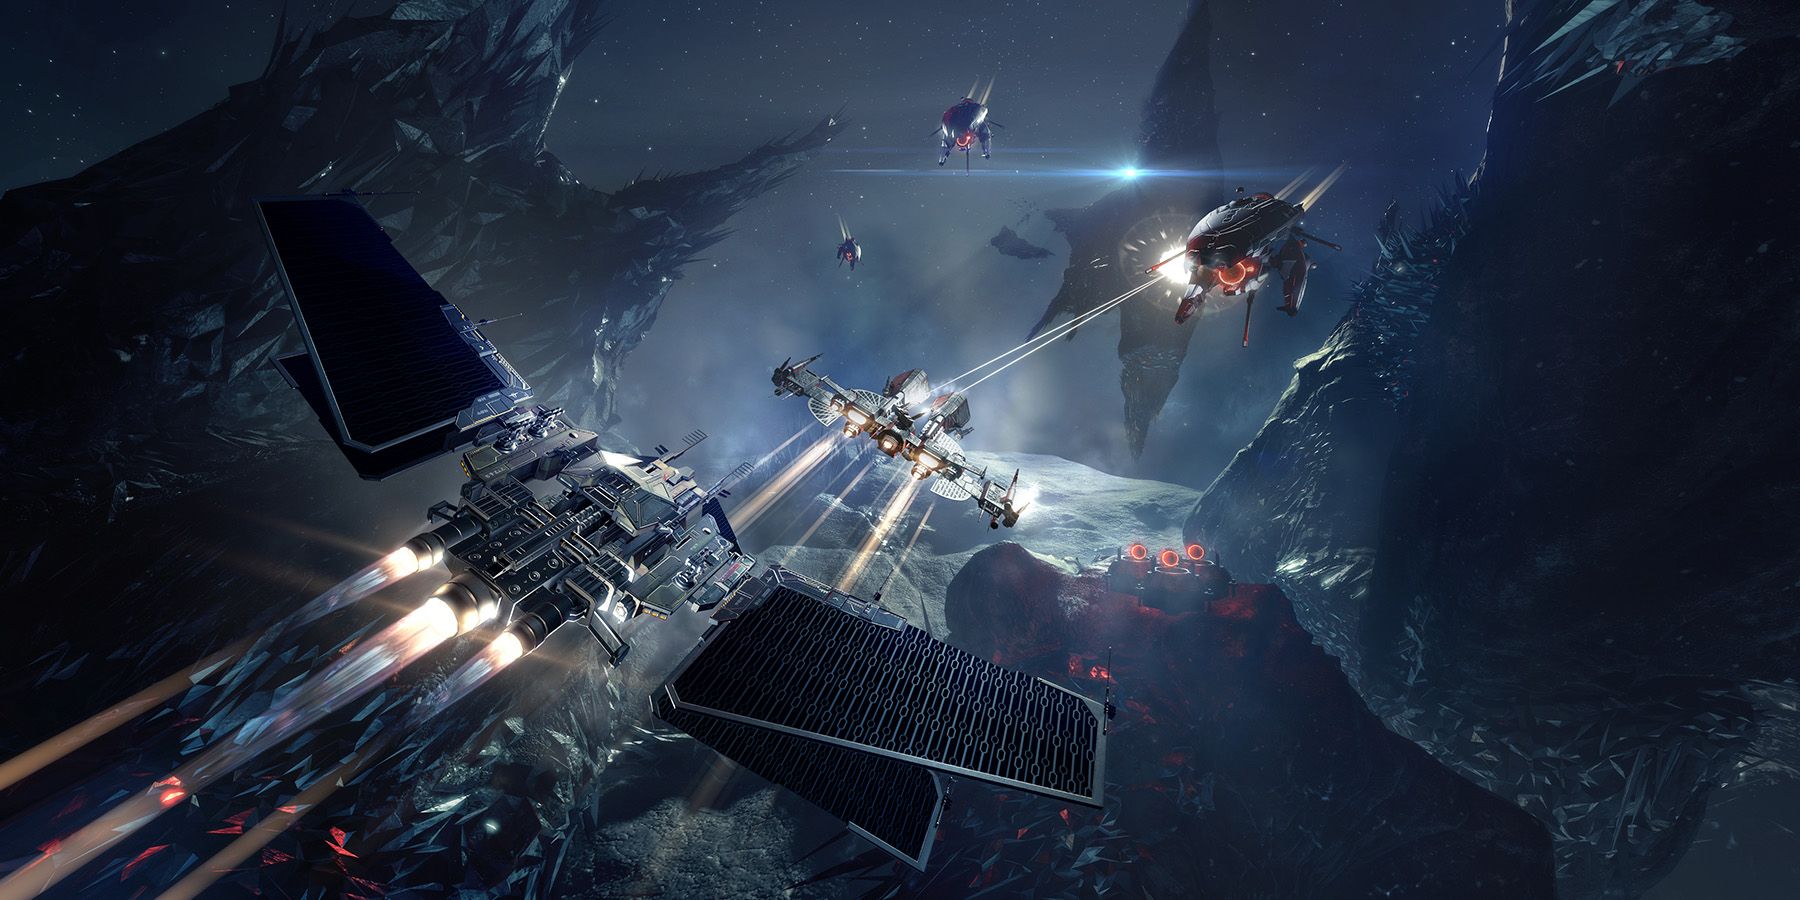 EVE Online CEO Says NFTs Won't Be Coming to the Game